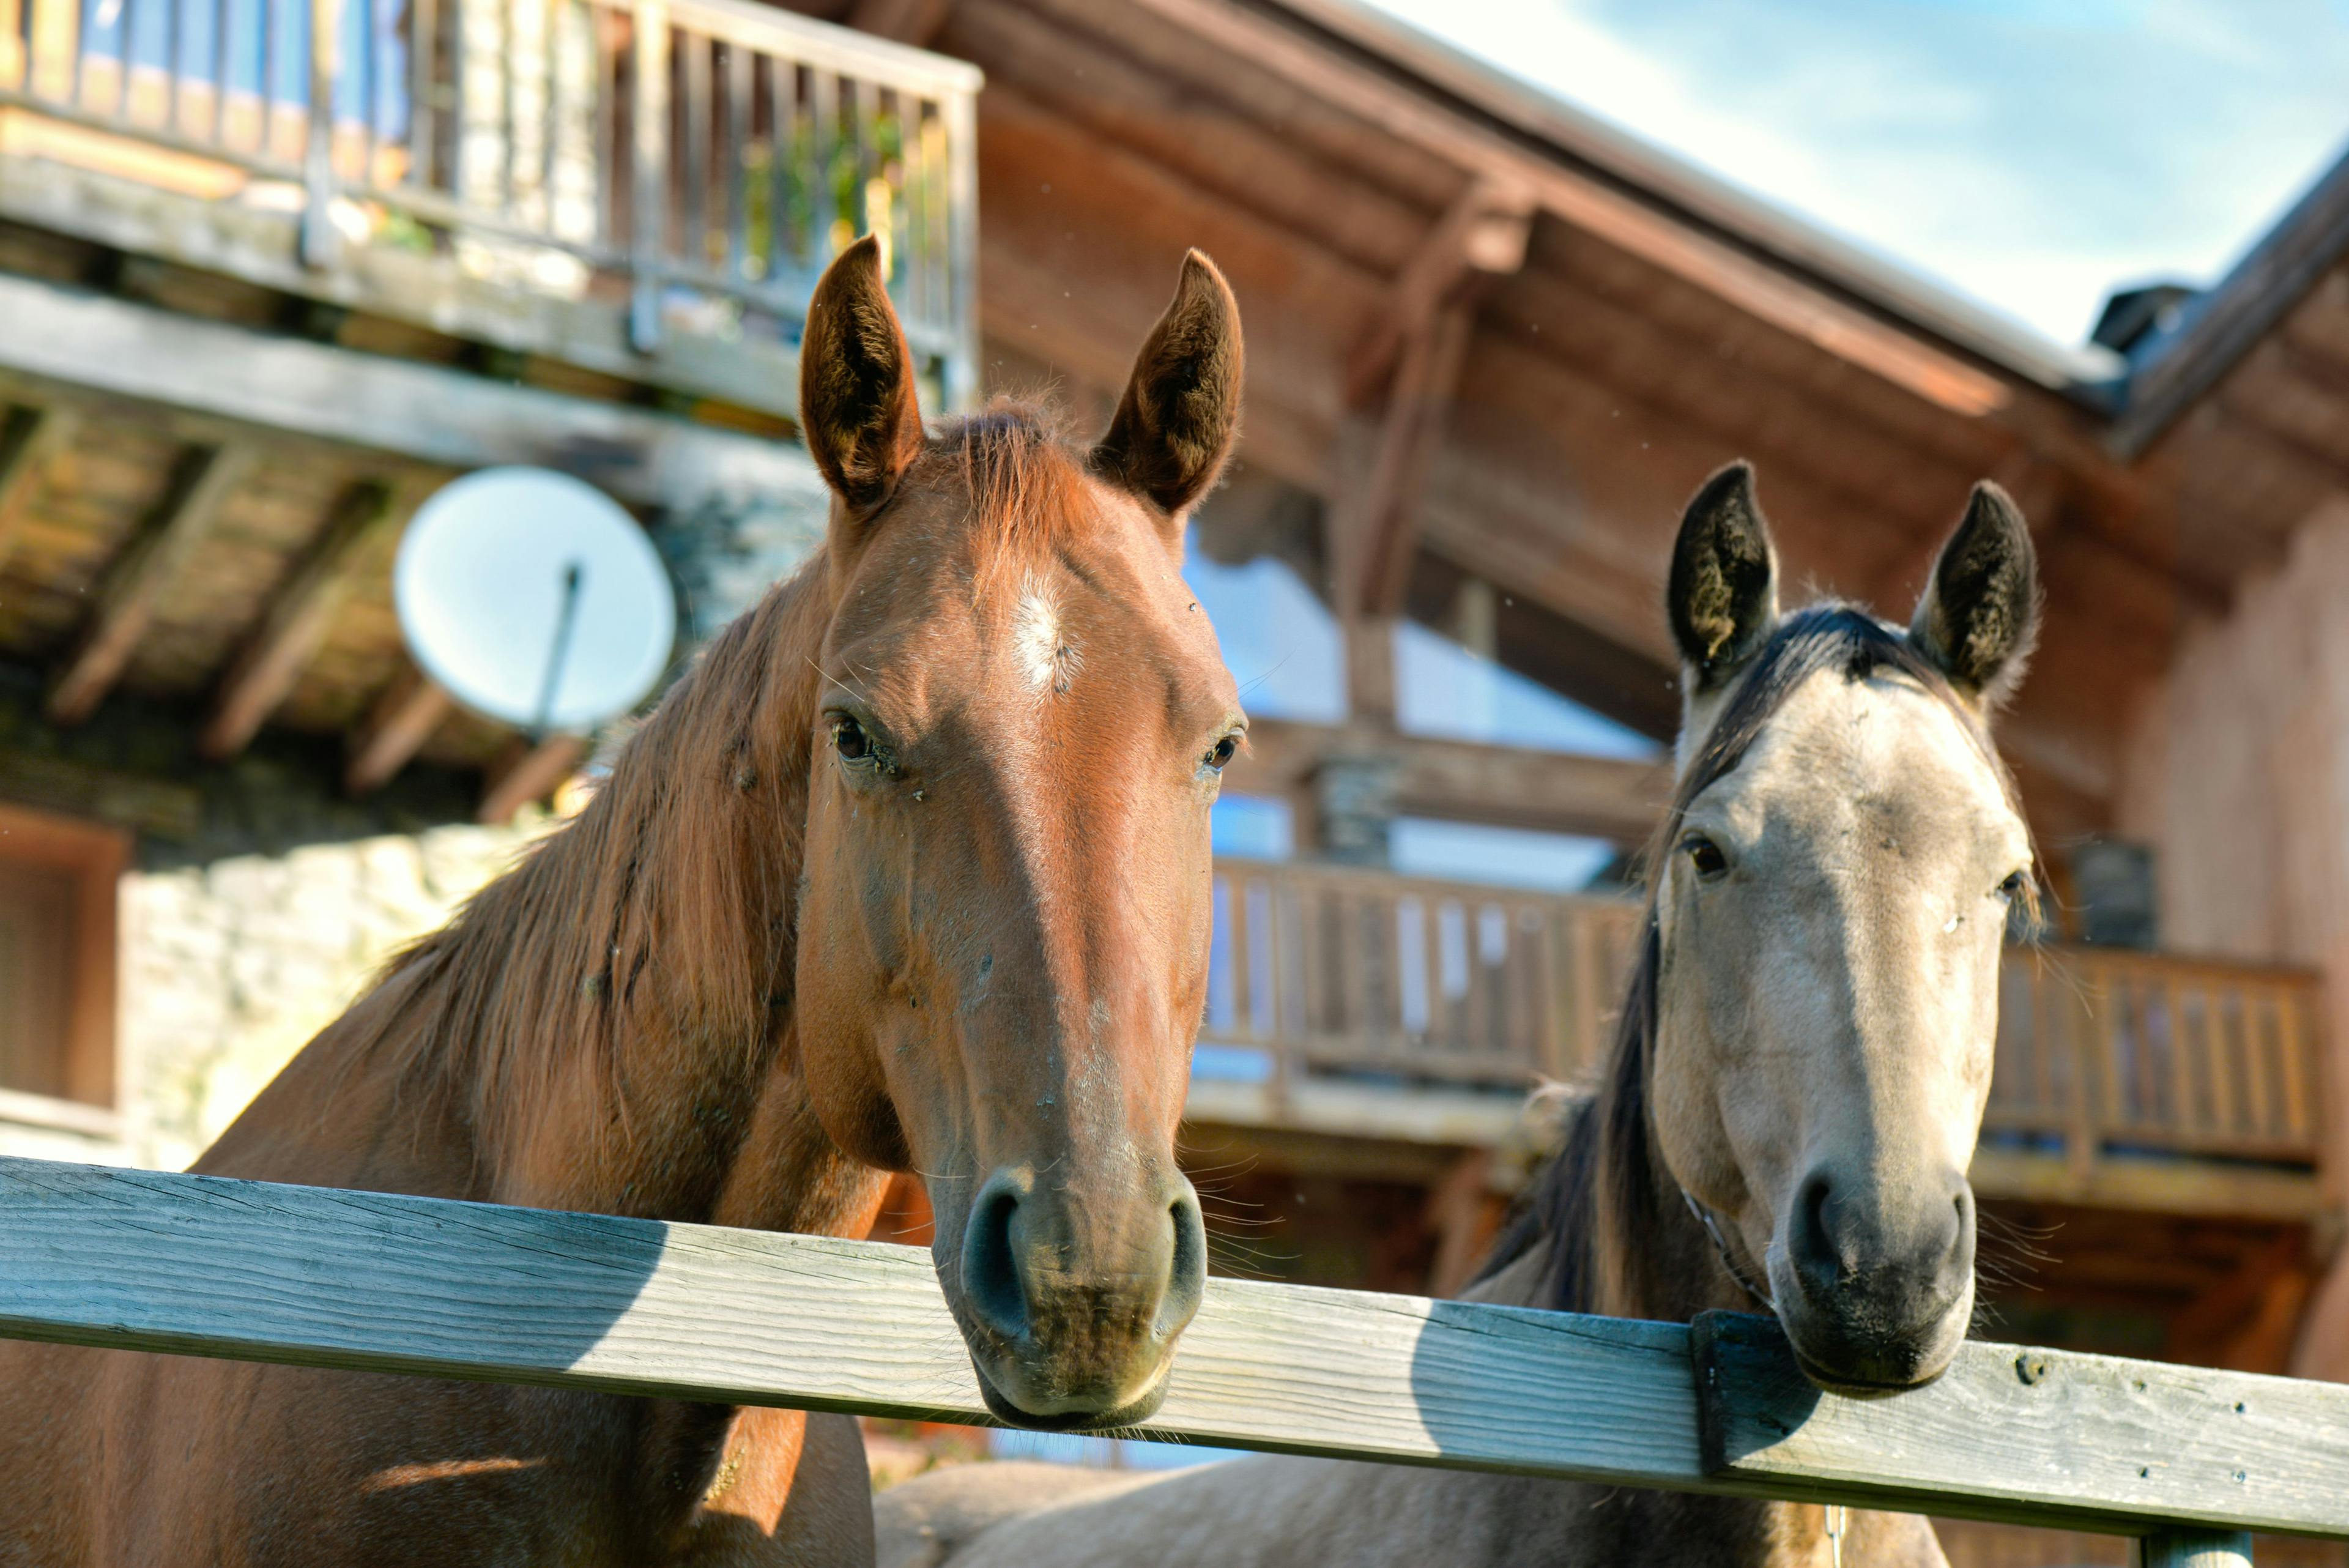 New study is evaluating CBD use in horses